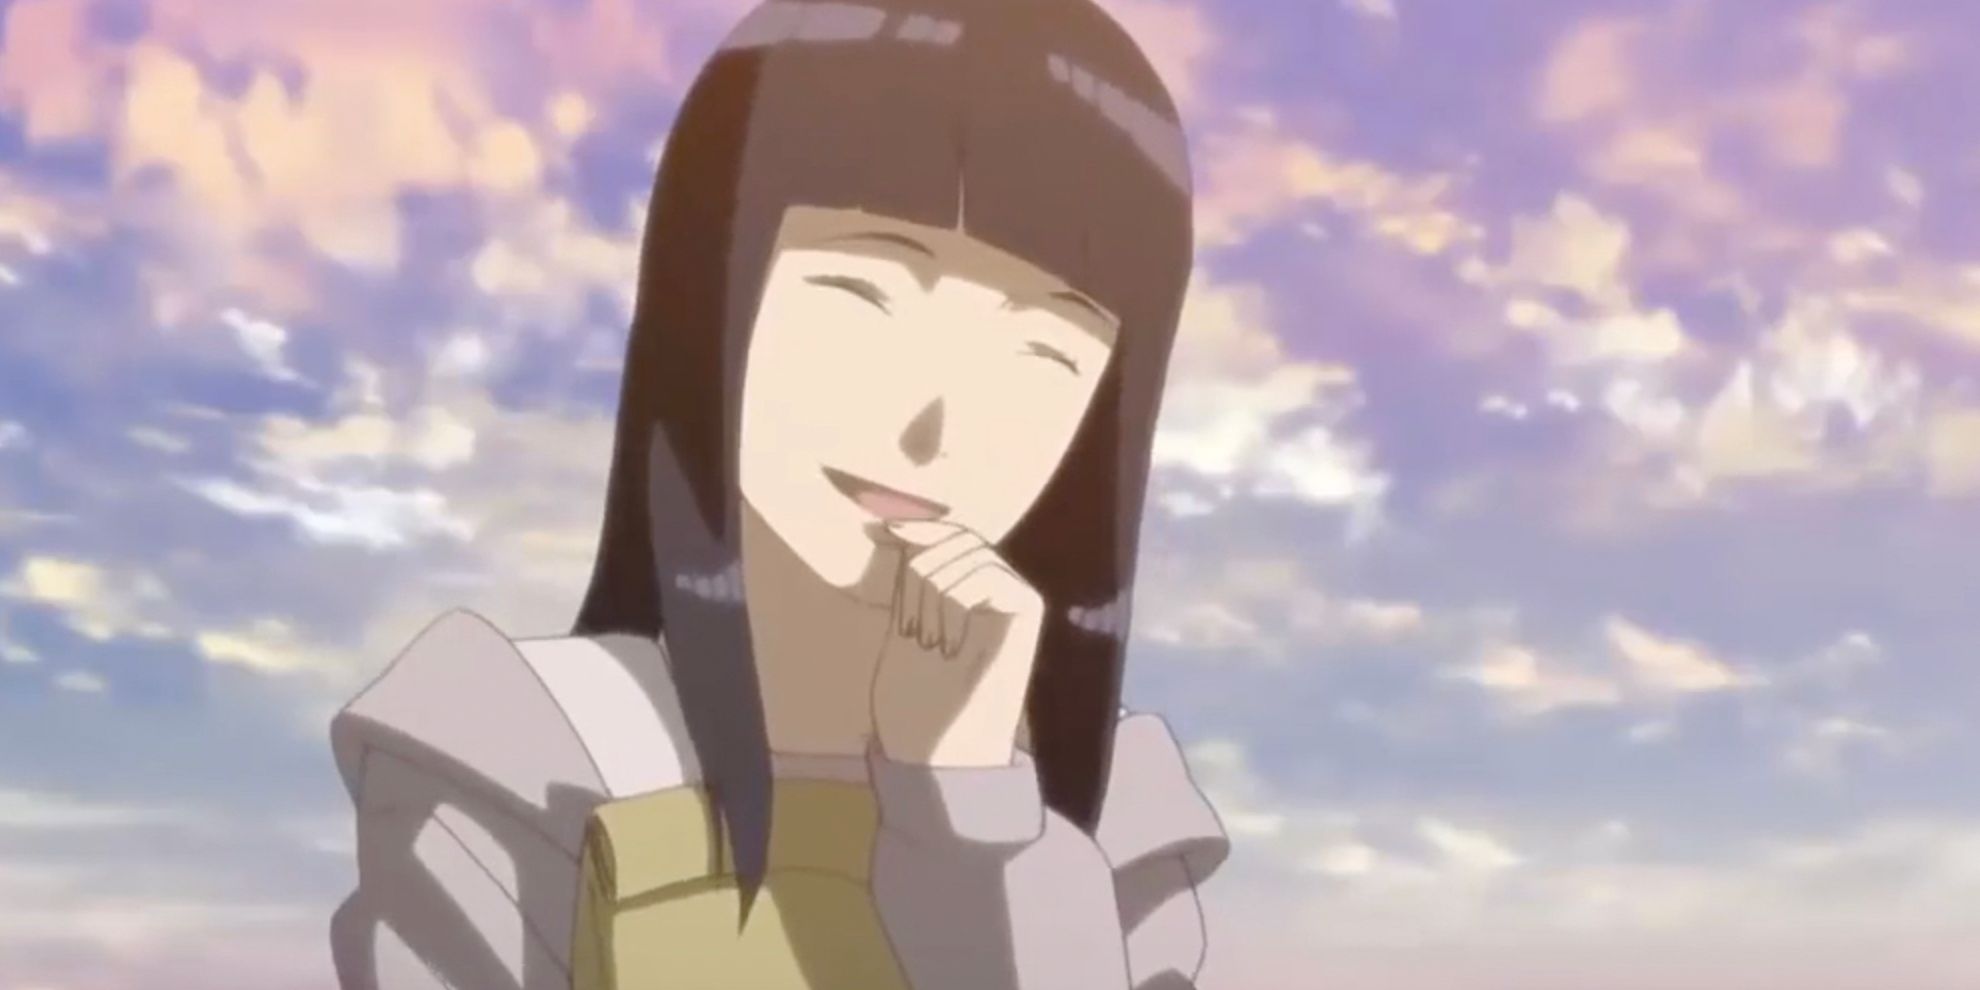 Hinata laughs with the sky in the background in Naruto Shippuden